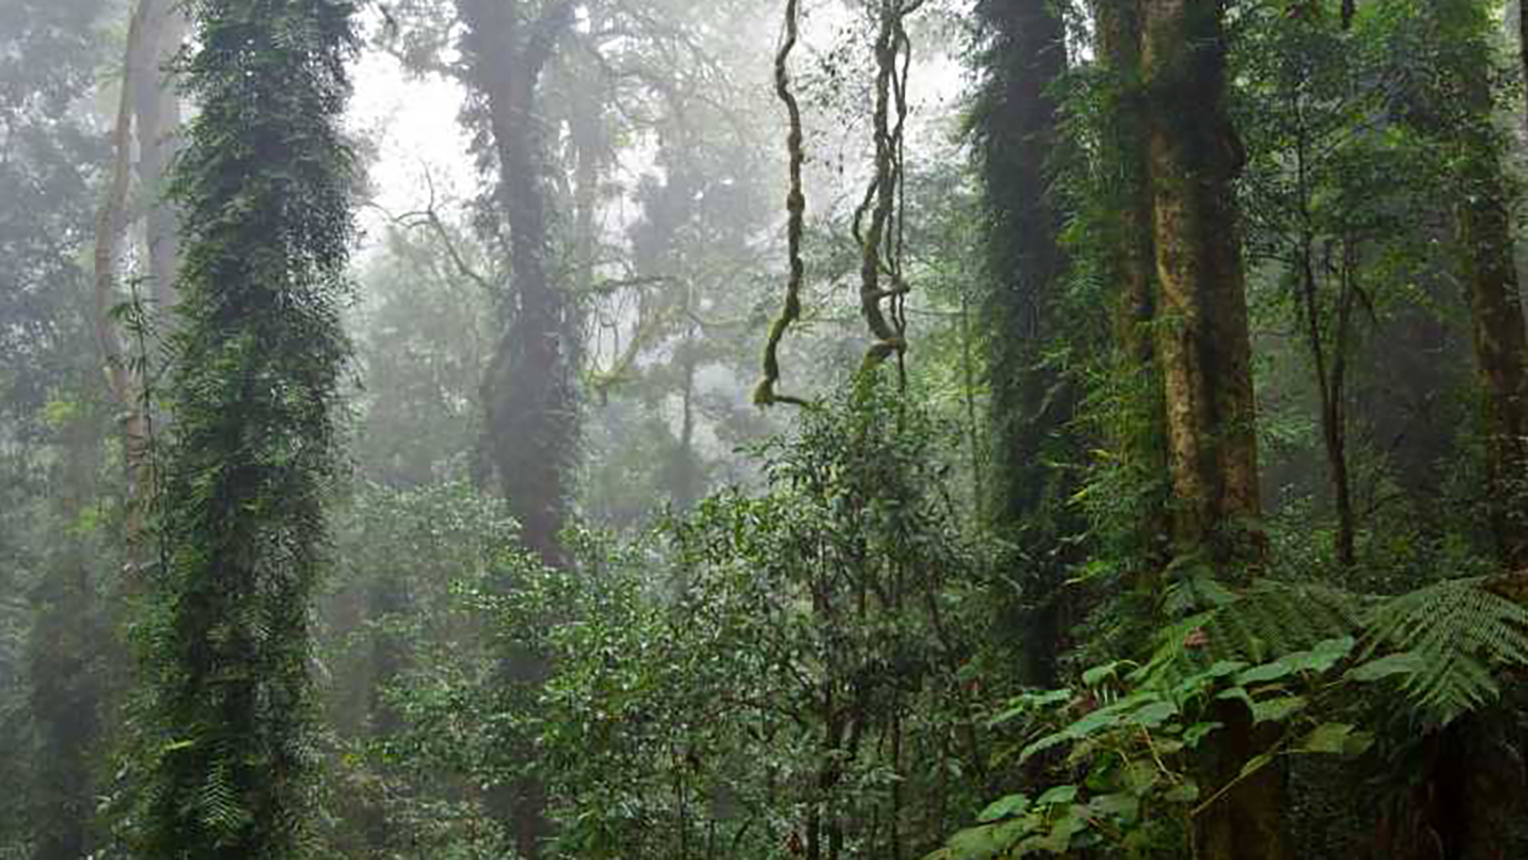 [alt text] Lush mid shot of a rainforest scene with several giant trees thickly covered in ferns and undergrowth. It is daytime but the light seems dim, misty and filtered as if it is raining lightly or the air is very damp.